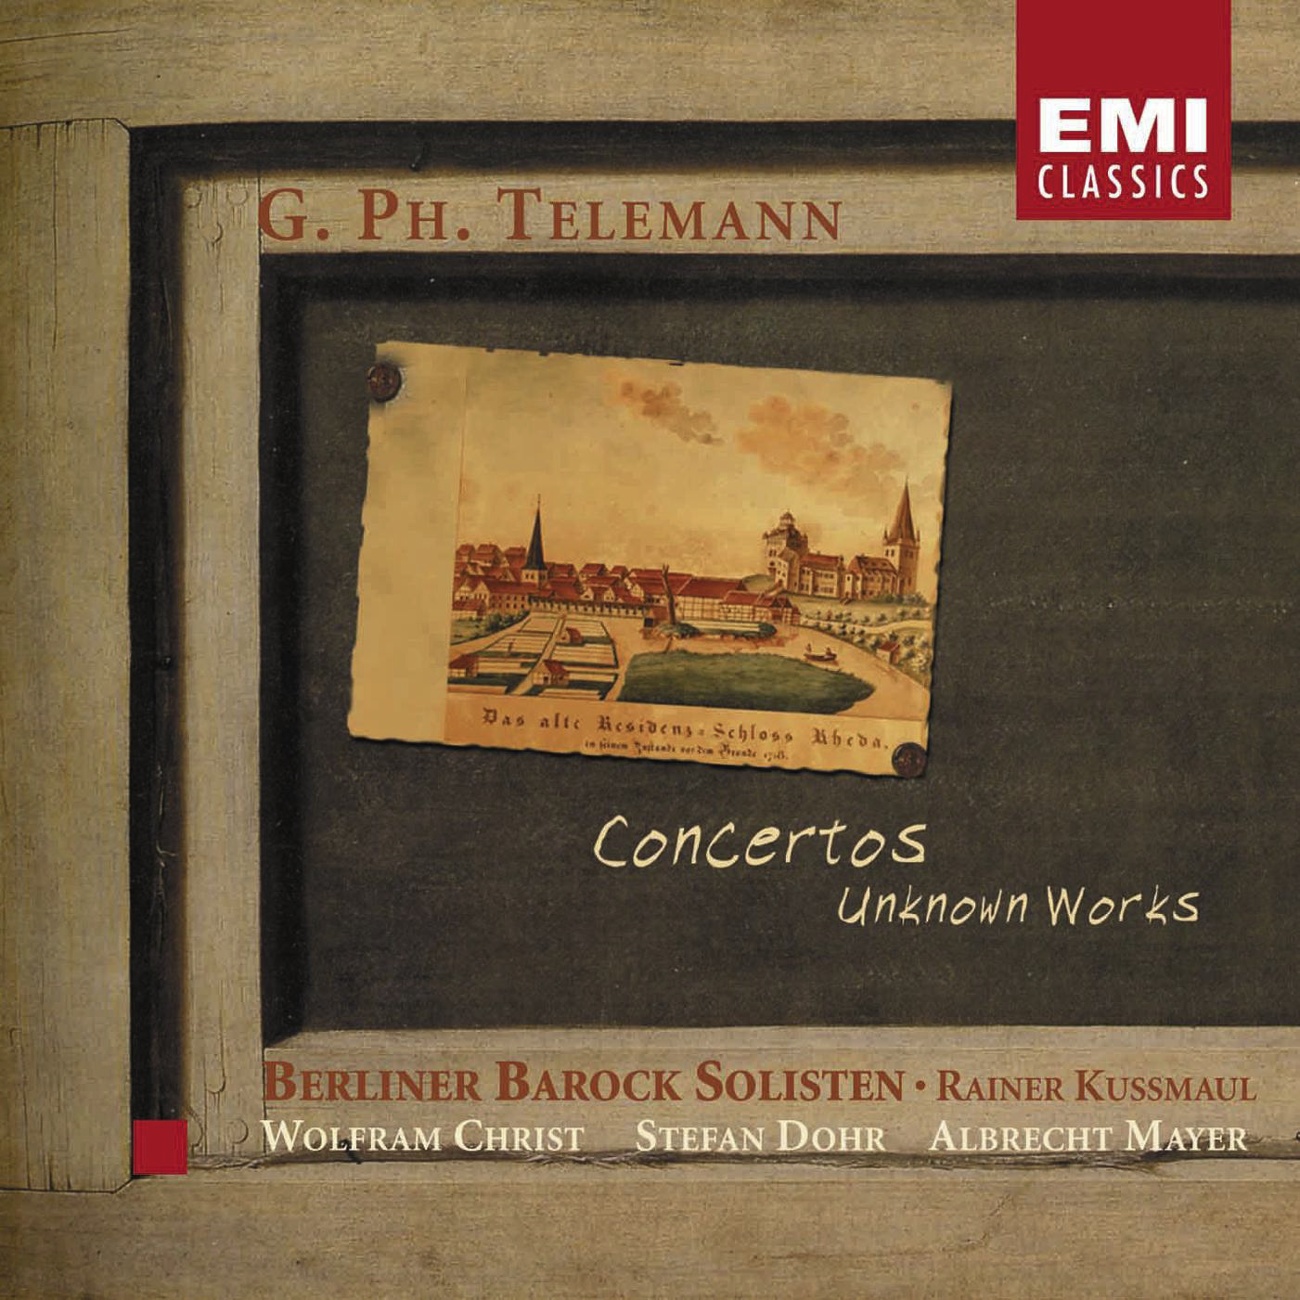 Concerto for 2 viola, strings and basso continuo in G: Vivement